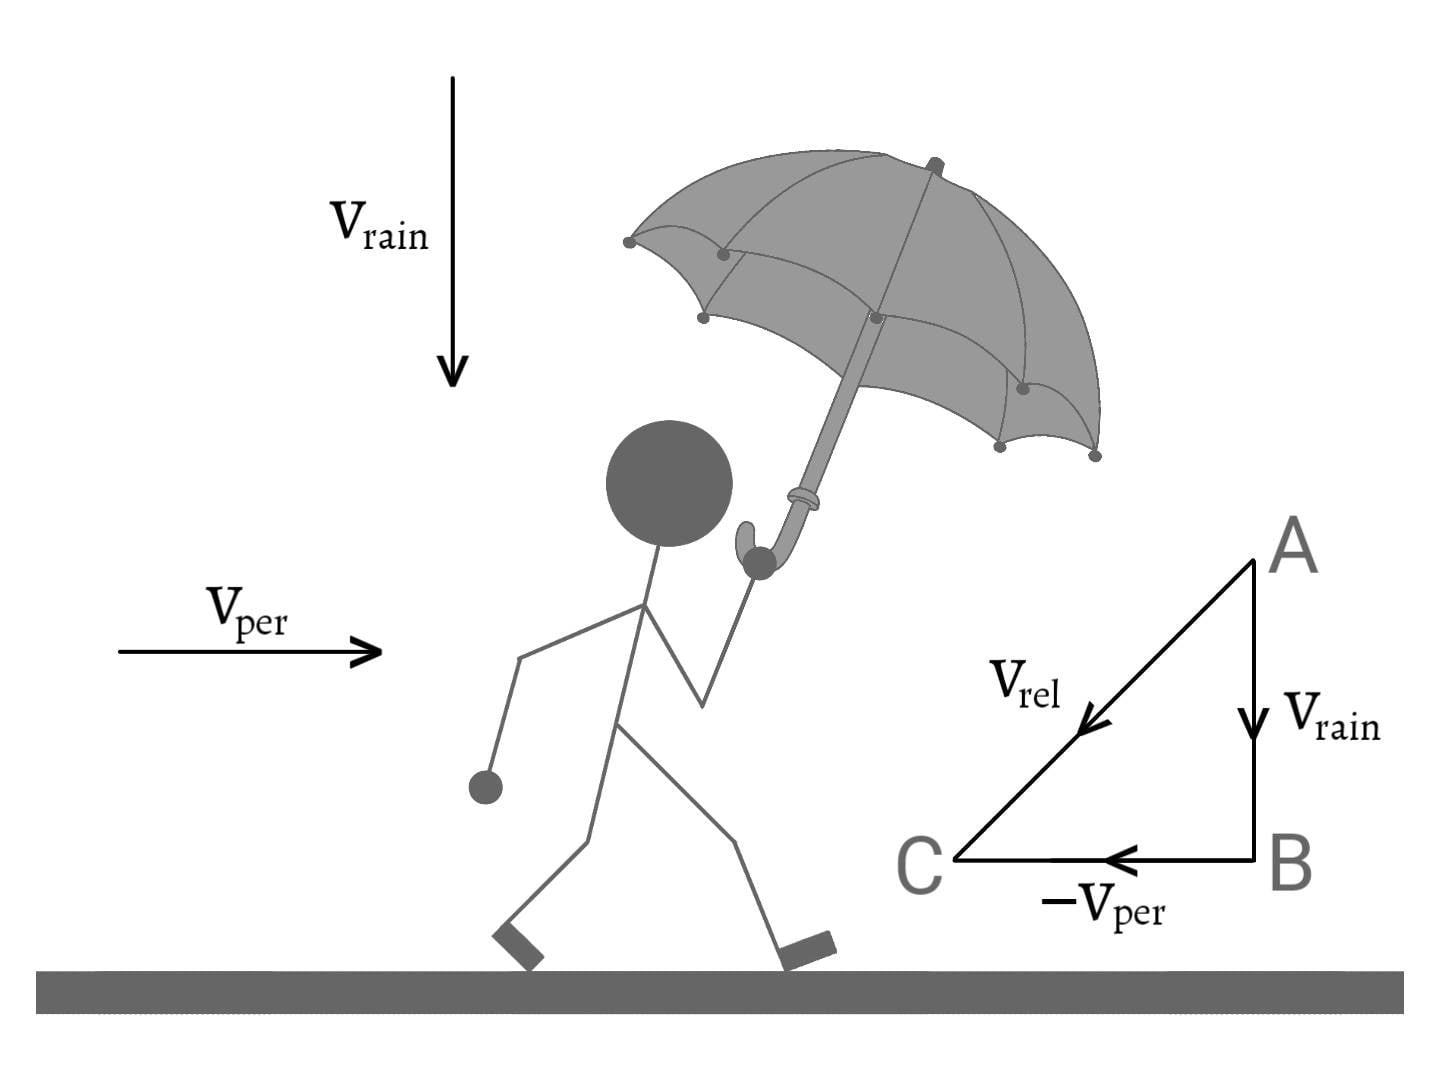 Why does a person hold his umbrella at some angle with the vertical while he is walking on road?